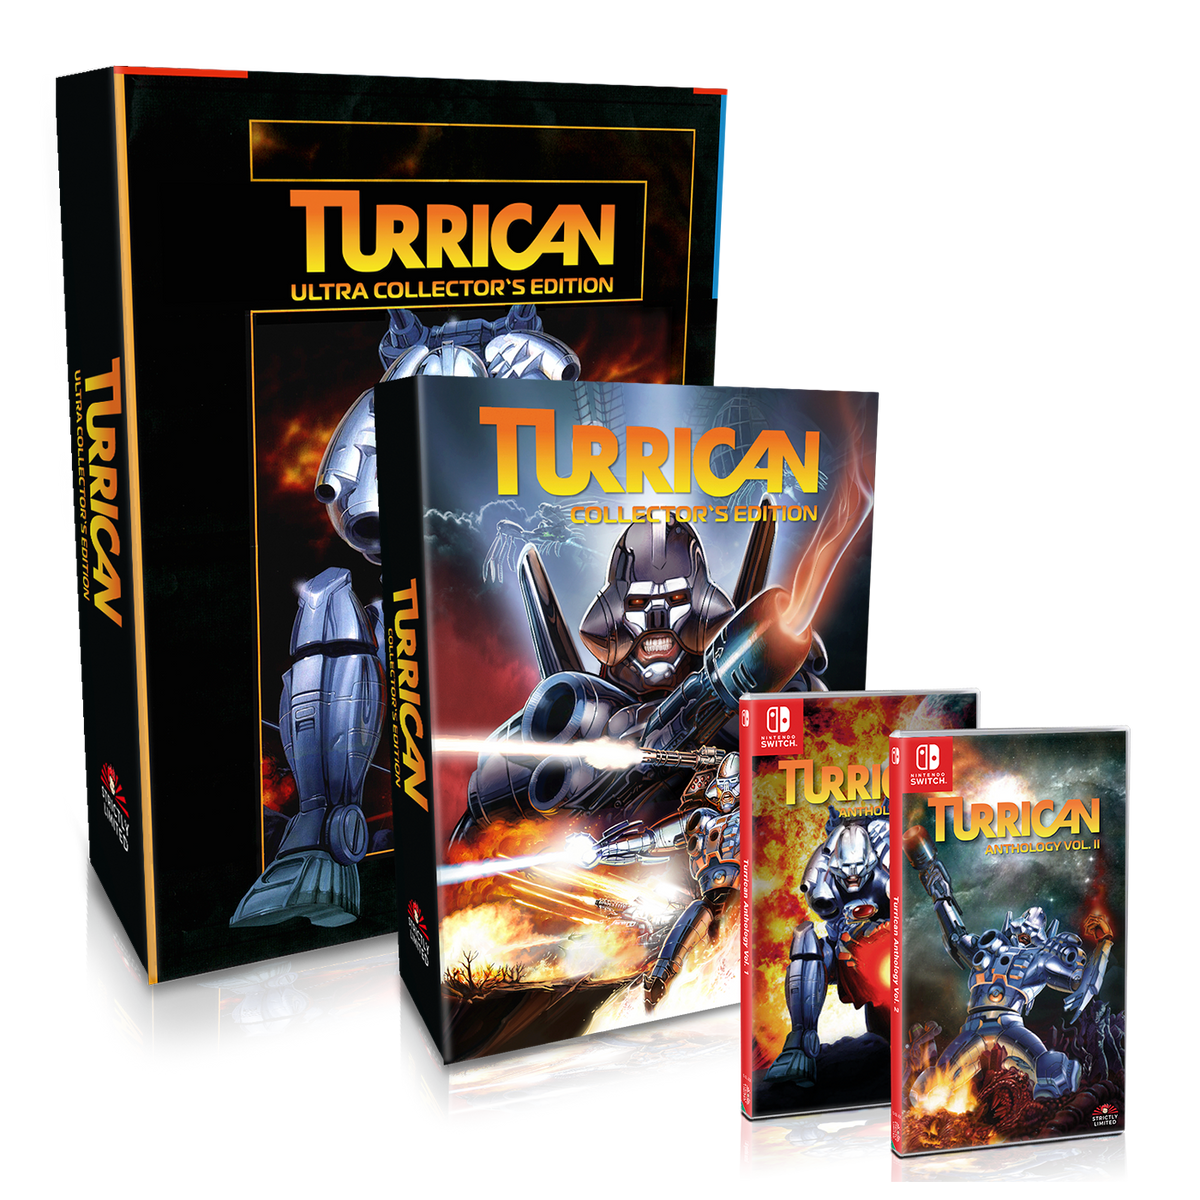 Ultra collection. Mega Turrican Sega. Turrican Cover Switch. Detectives United: Origins Collector's Edition.